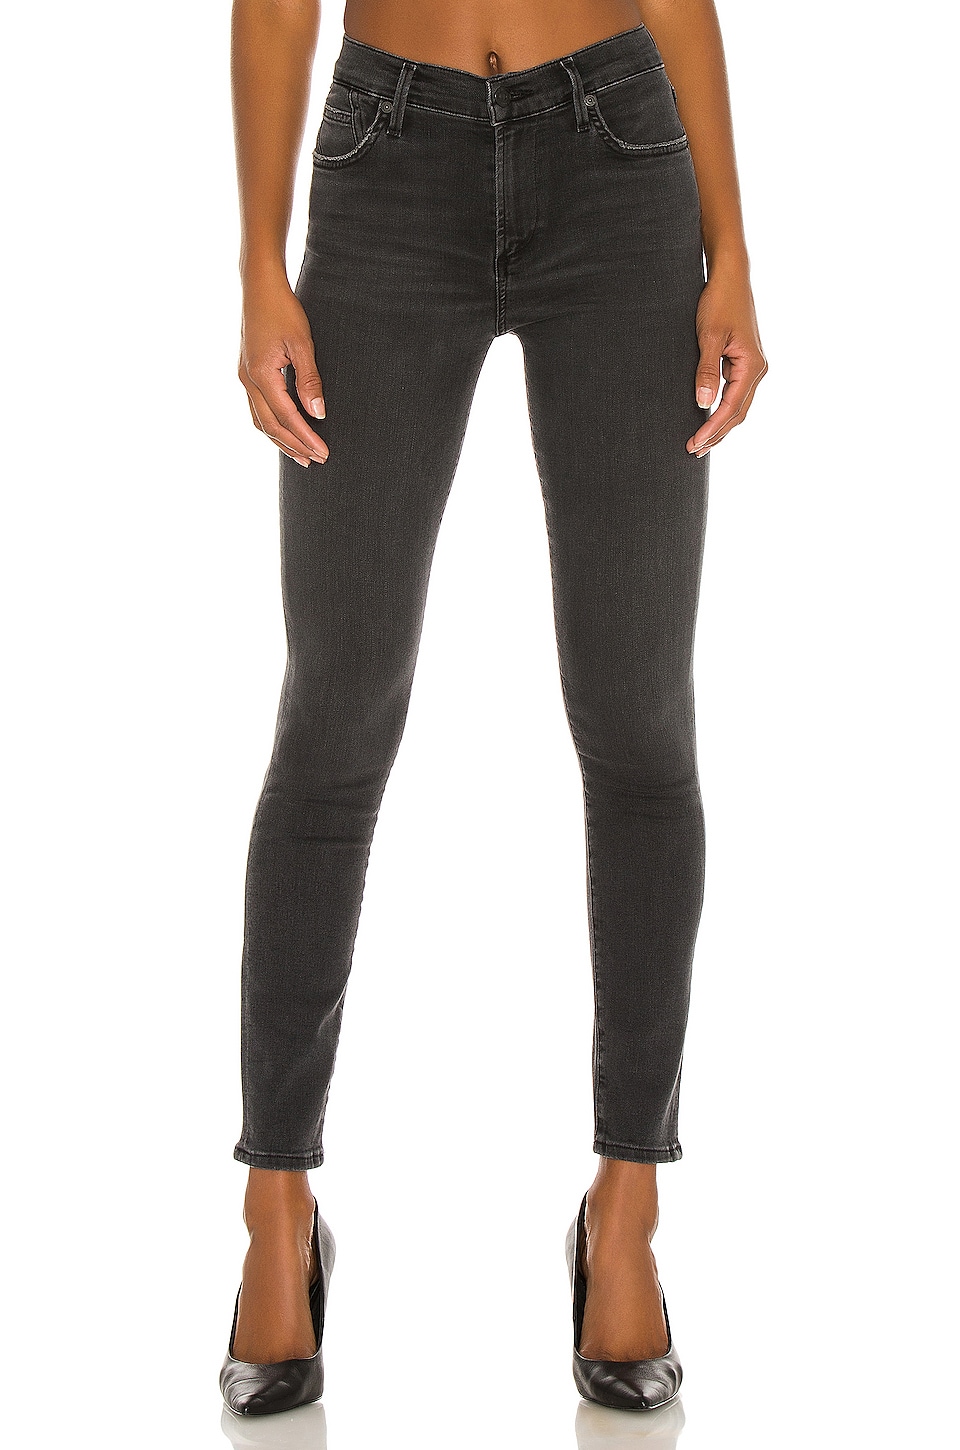 Citizens of Humanity Rocket Ankle Skinny Jean in Reflection | REVOLVE